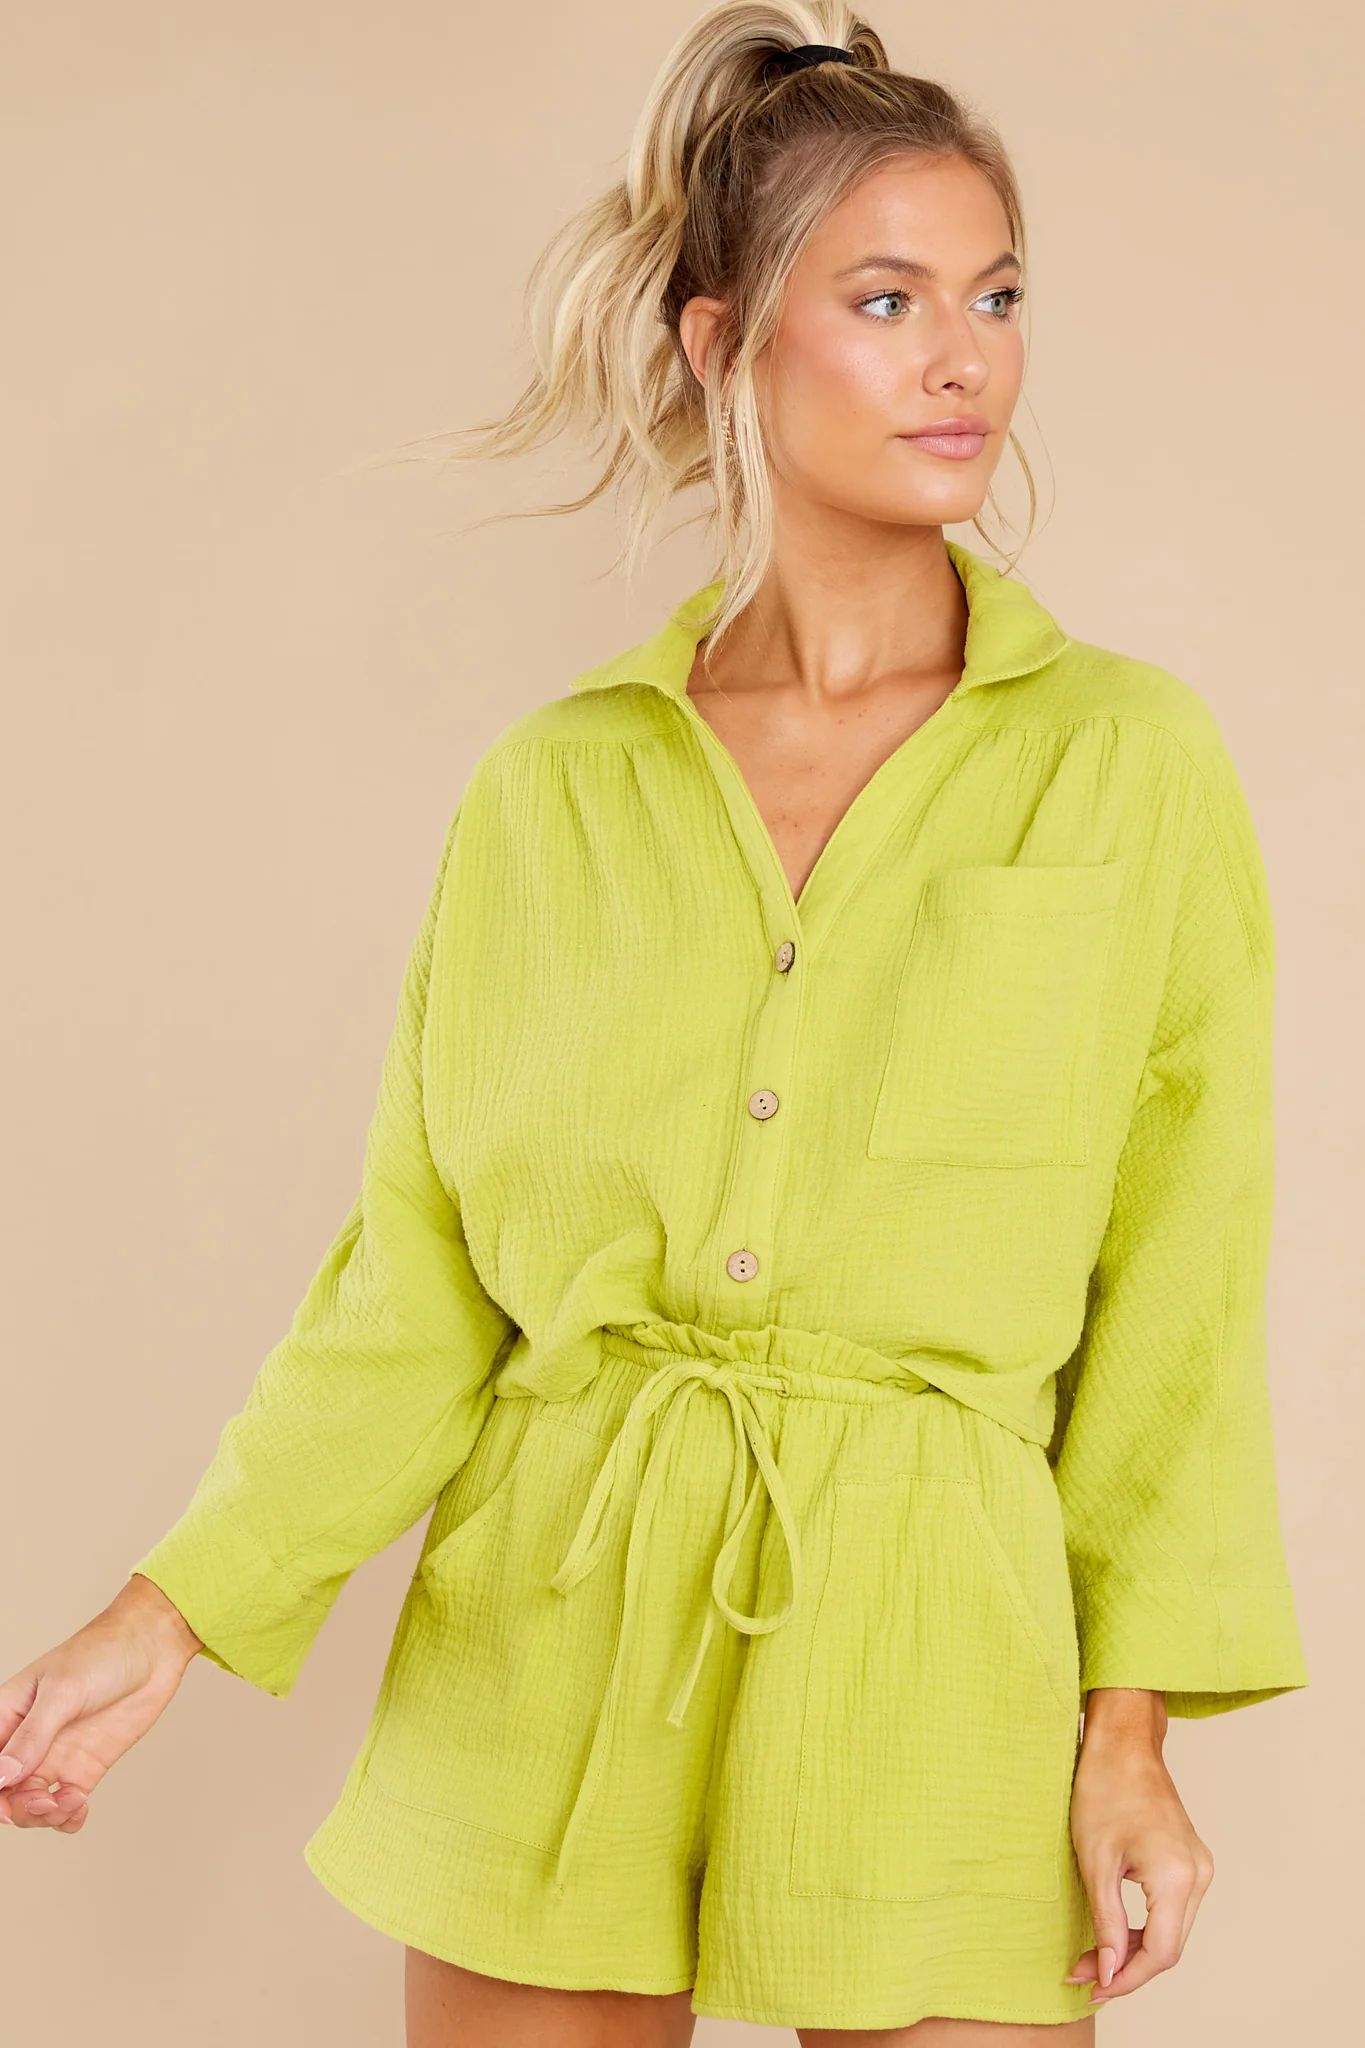 Meet At Sunset Lime Green Two Piece Set | Red Dress 